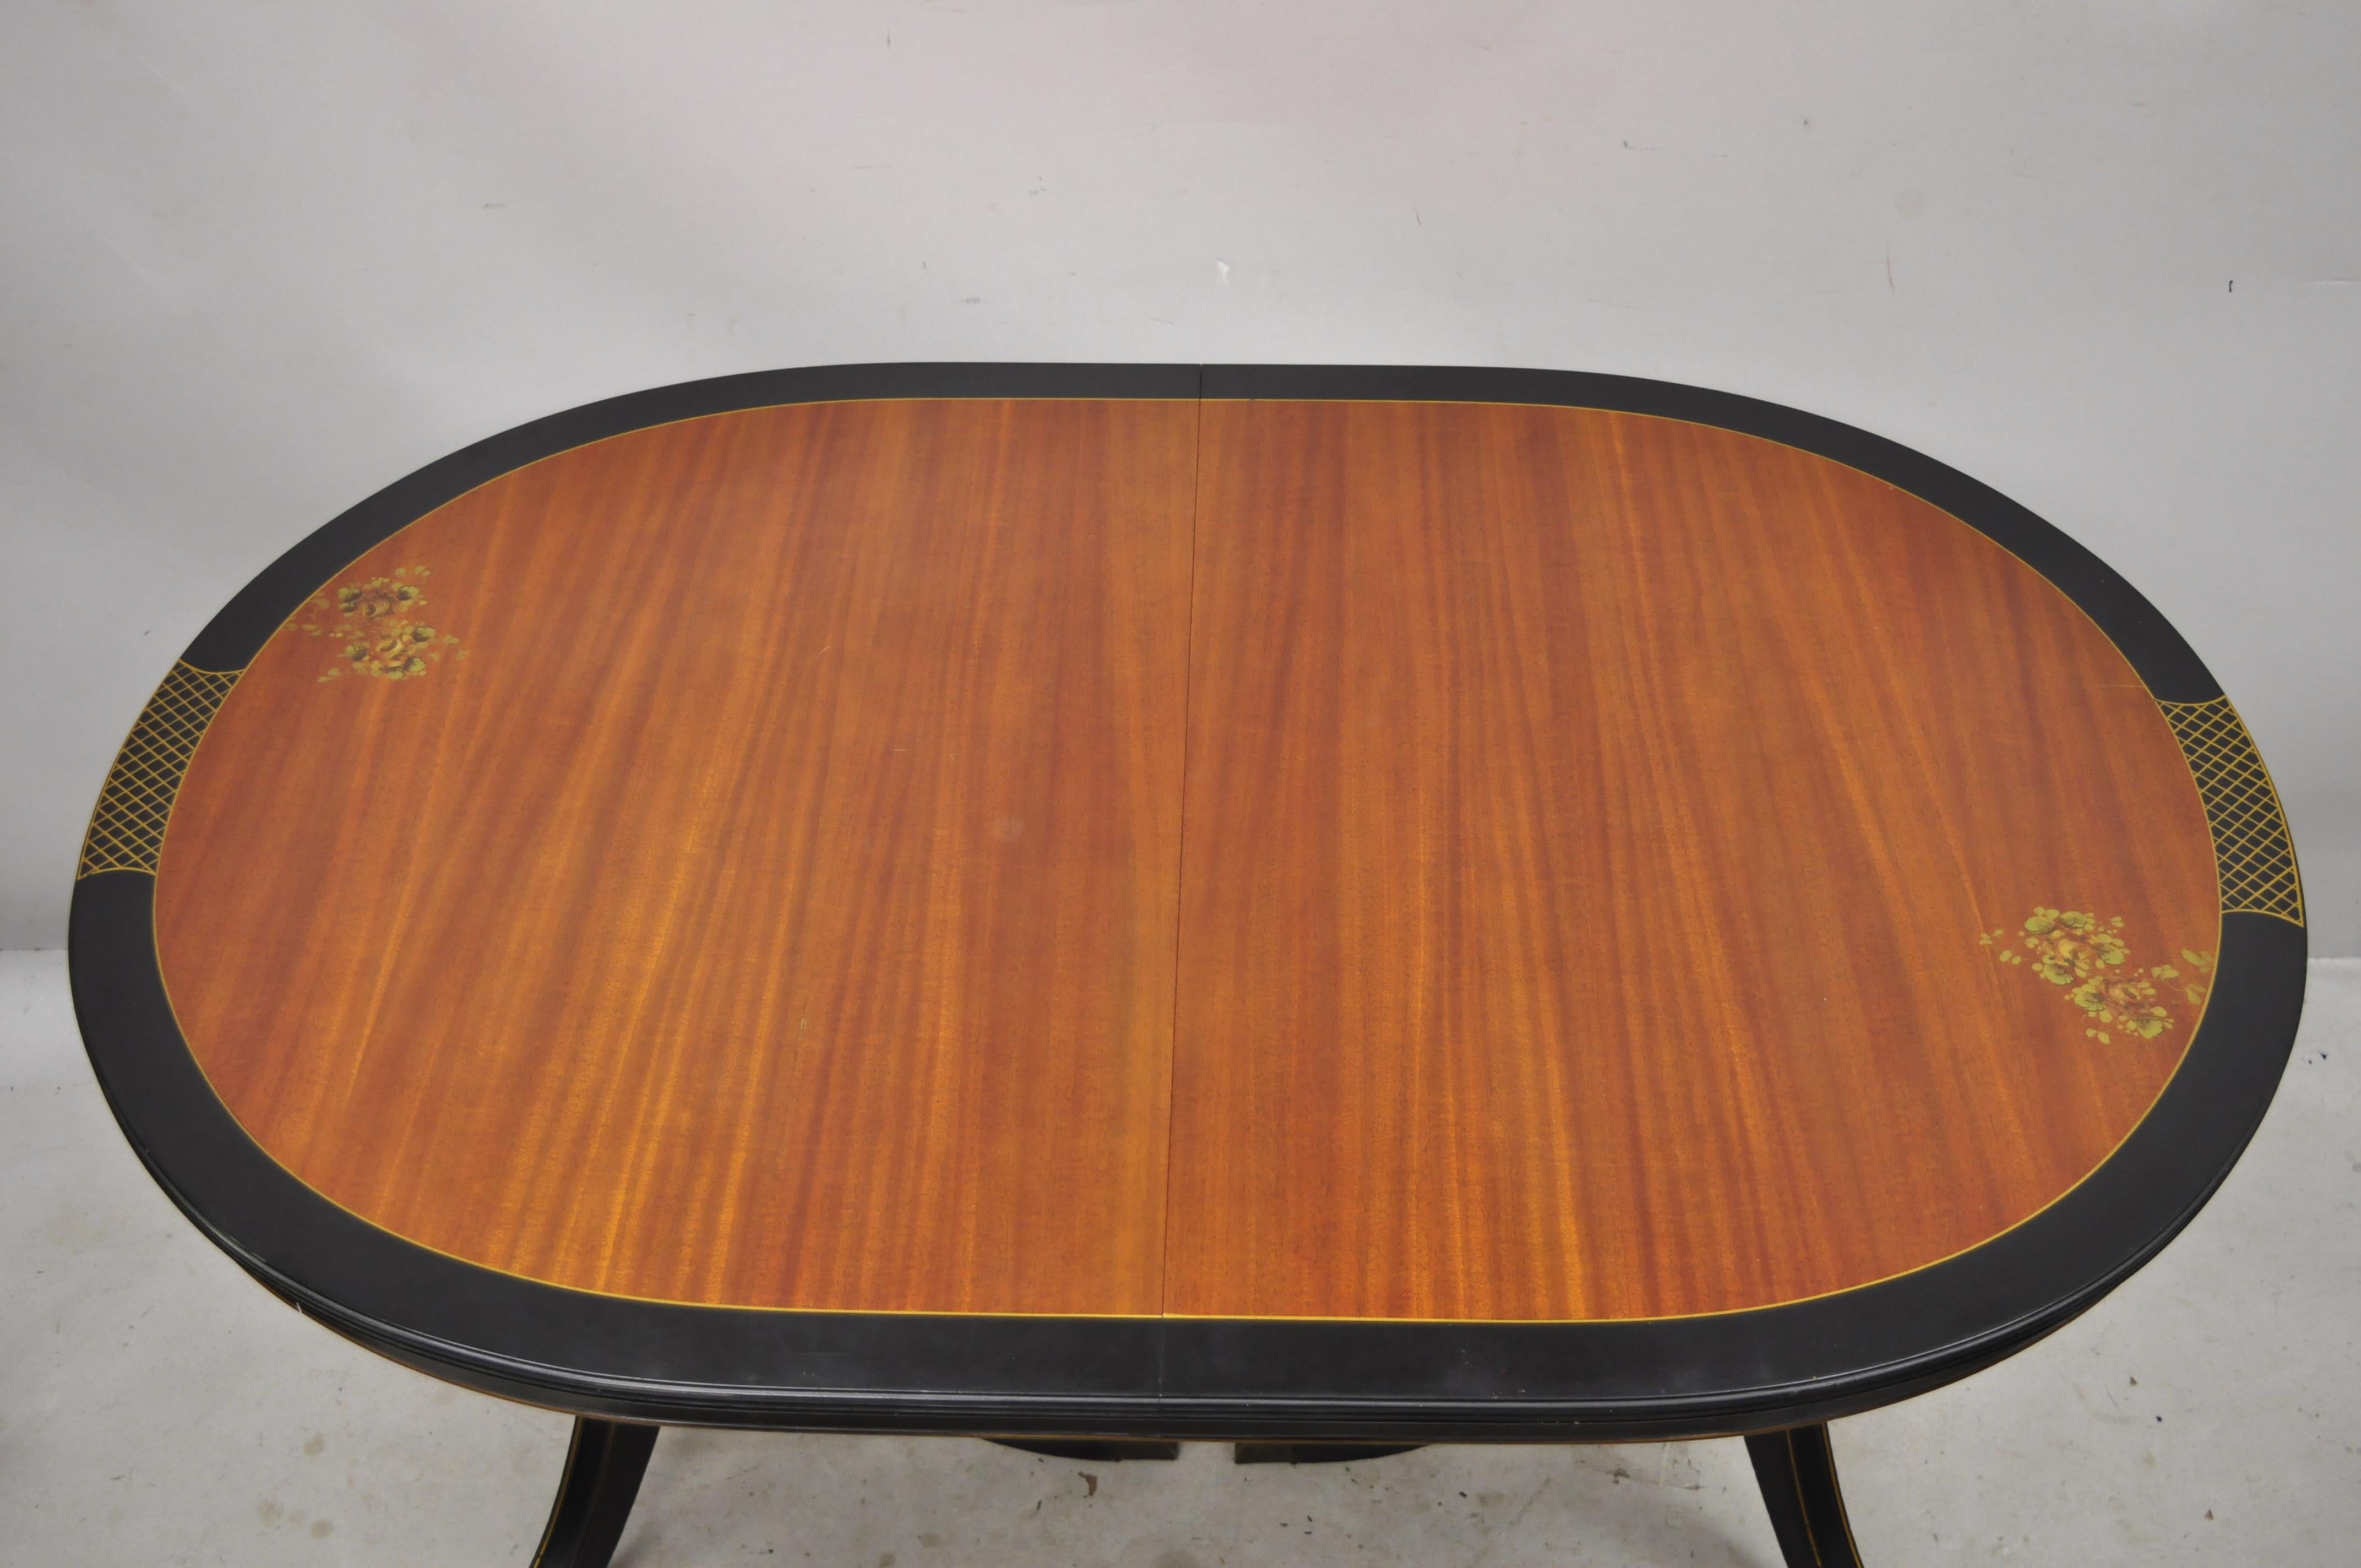 Alliance Furniture Co. Duncan Phyfe mahogany oriental style black oval dining room table with 3 leaves. Item features (3) 12